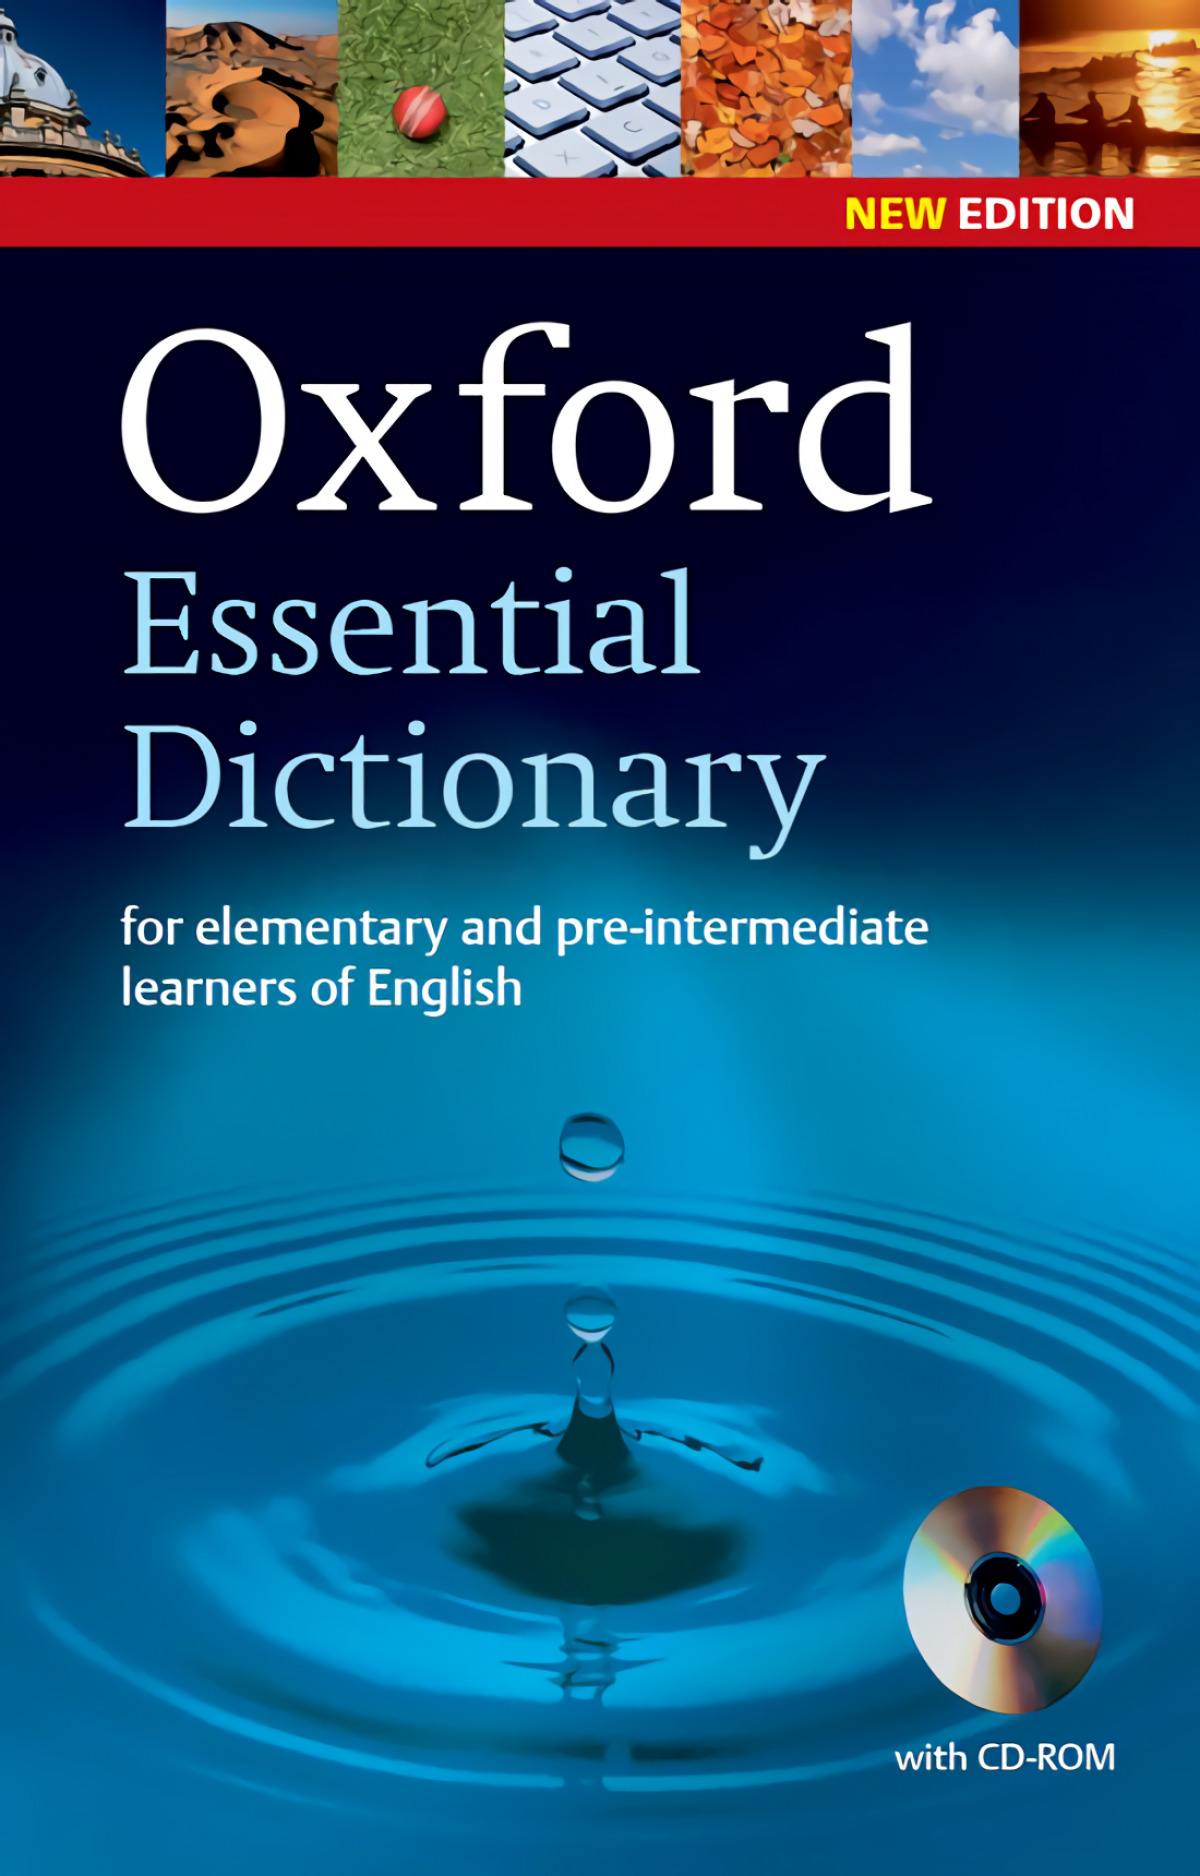 Oxford Essential Dictionary, w. CD-ROM: for elementary and pre-intermediate learners of English. 19,000 British and American words and phrases. Niveau A1/A2